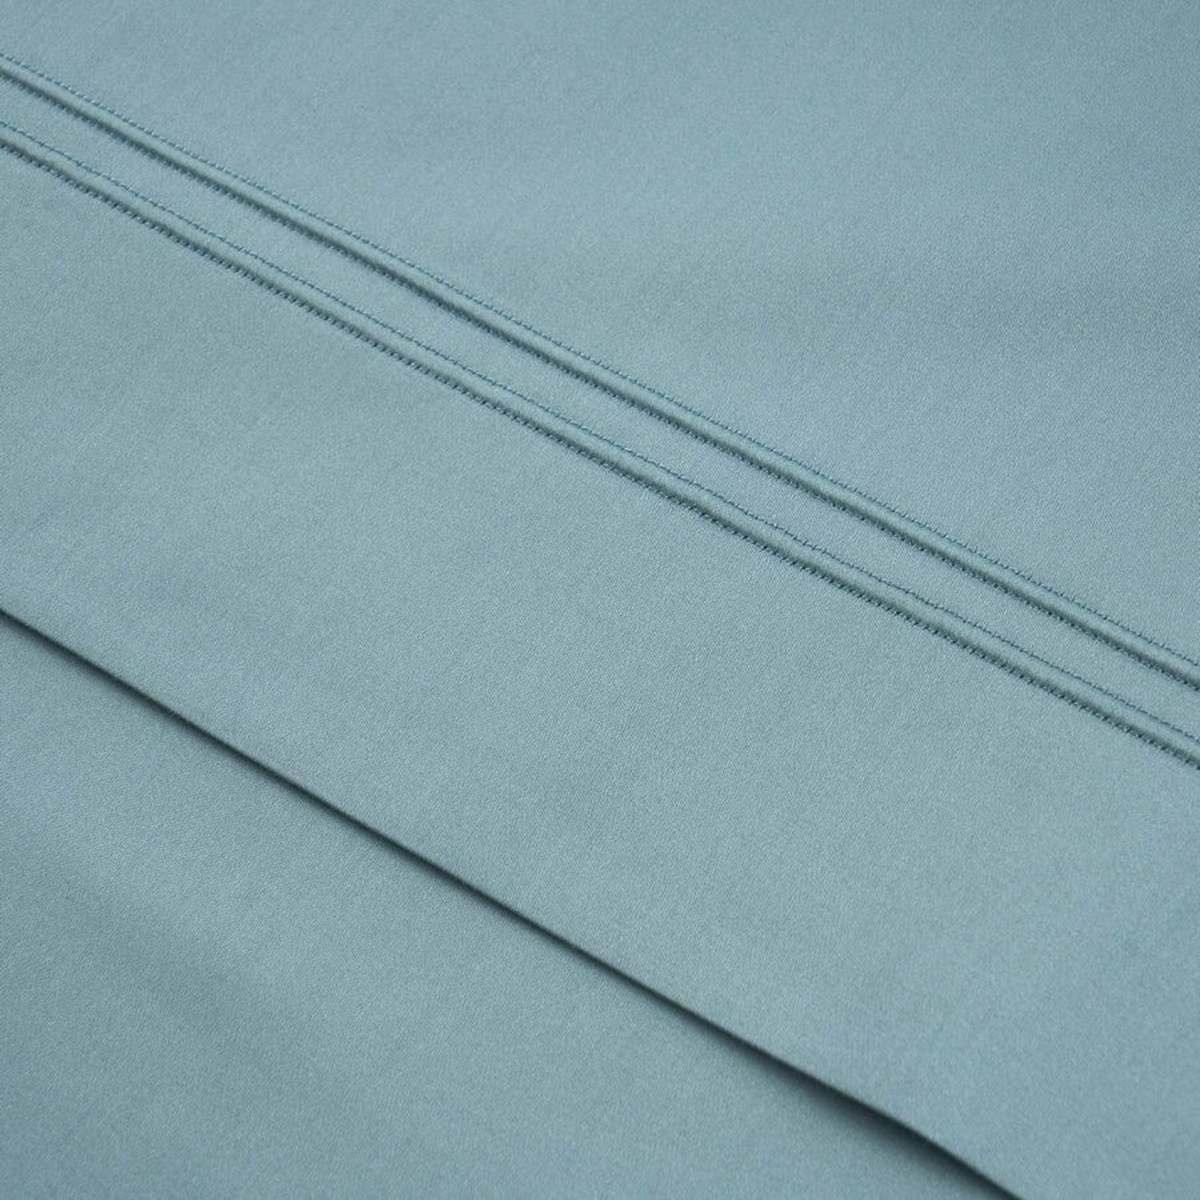 Closeup of Fabric of Yves Delorme Triomphe Sheet Sets in Fjord Color